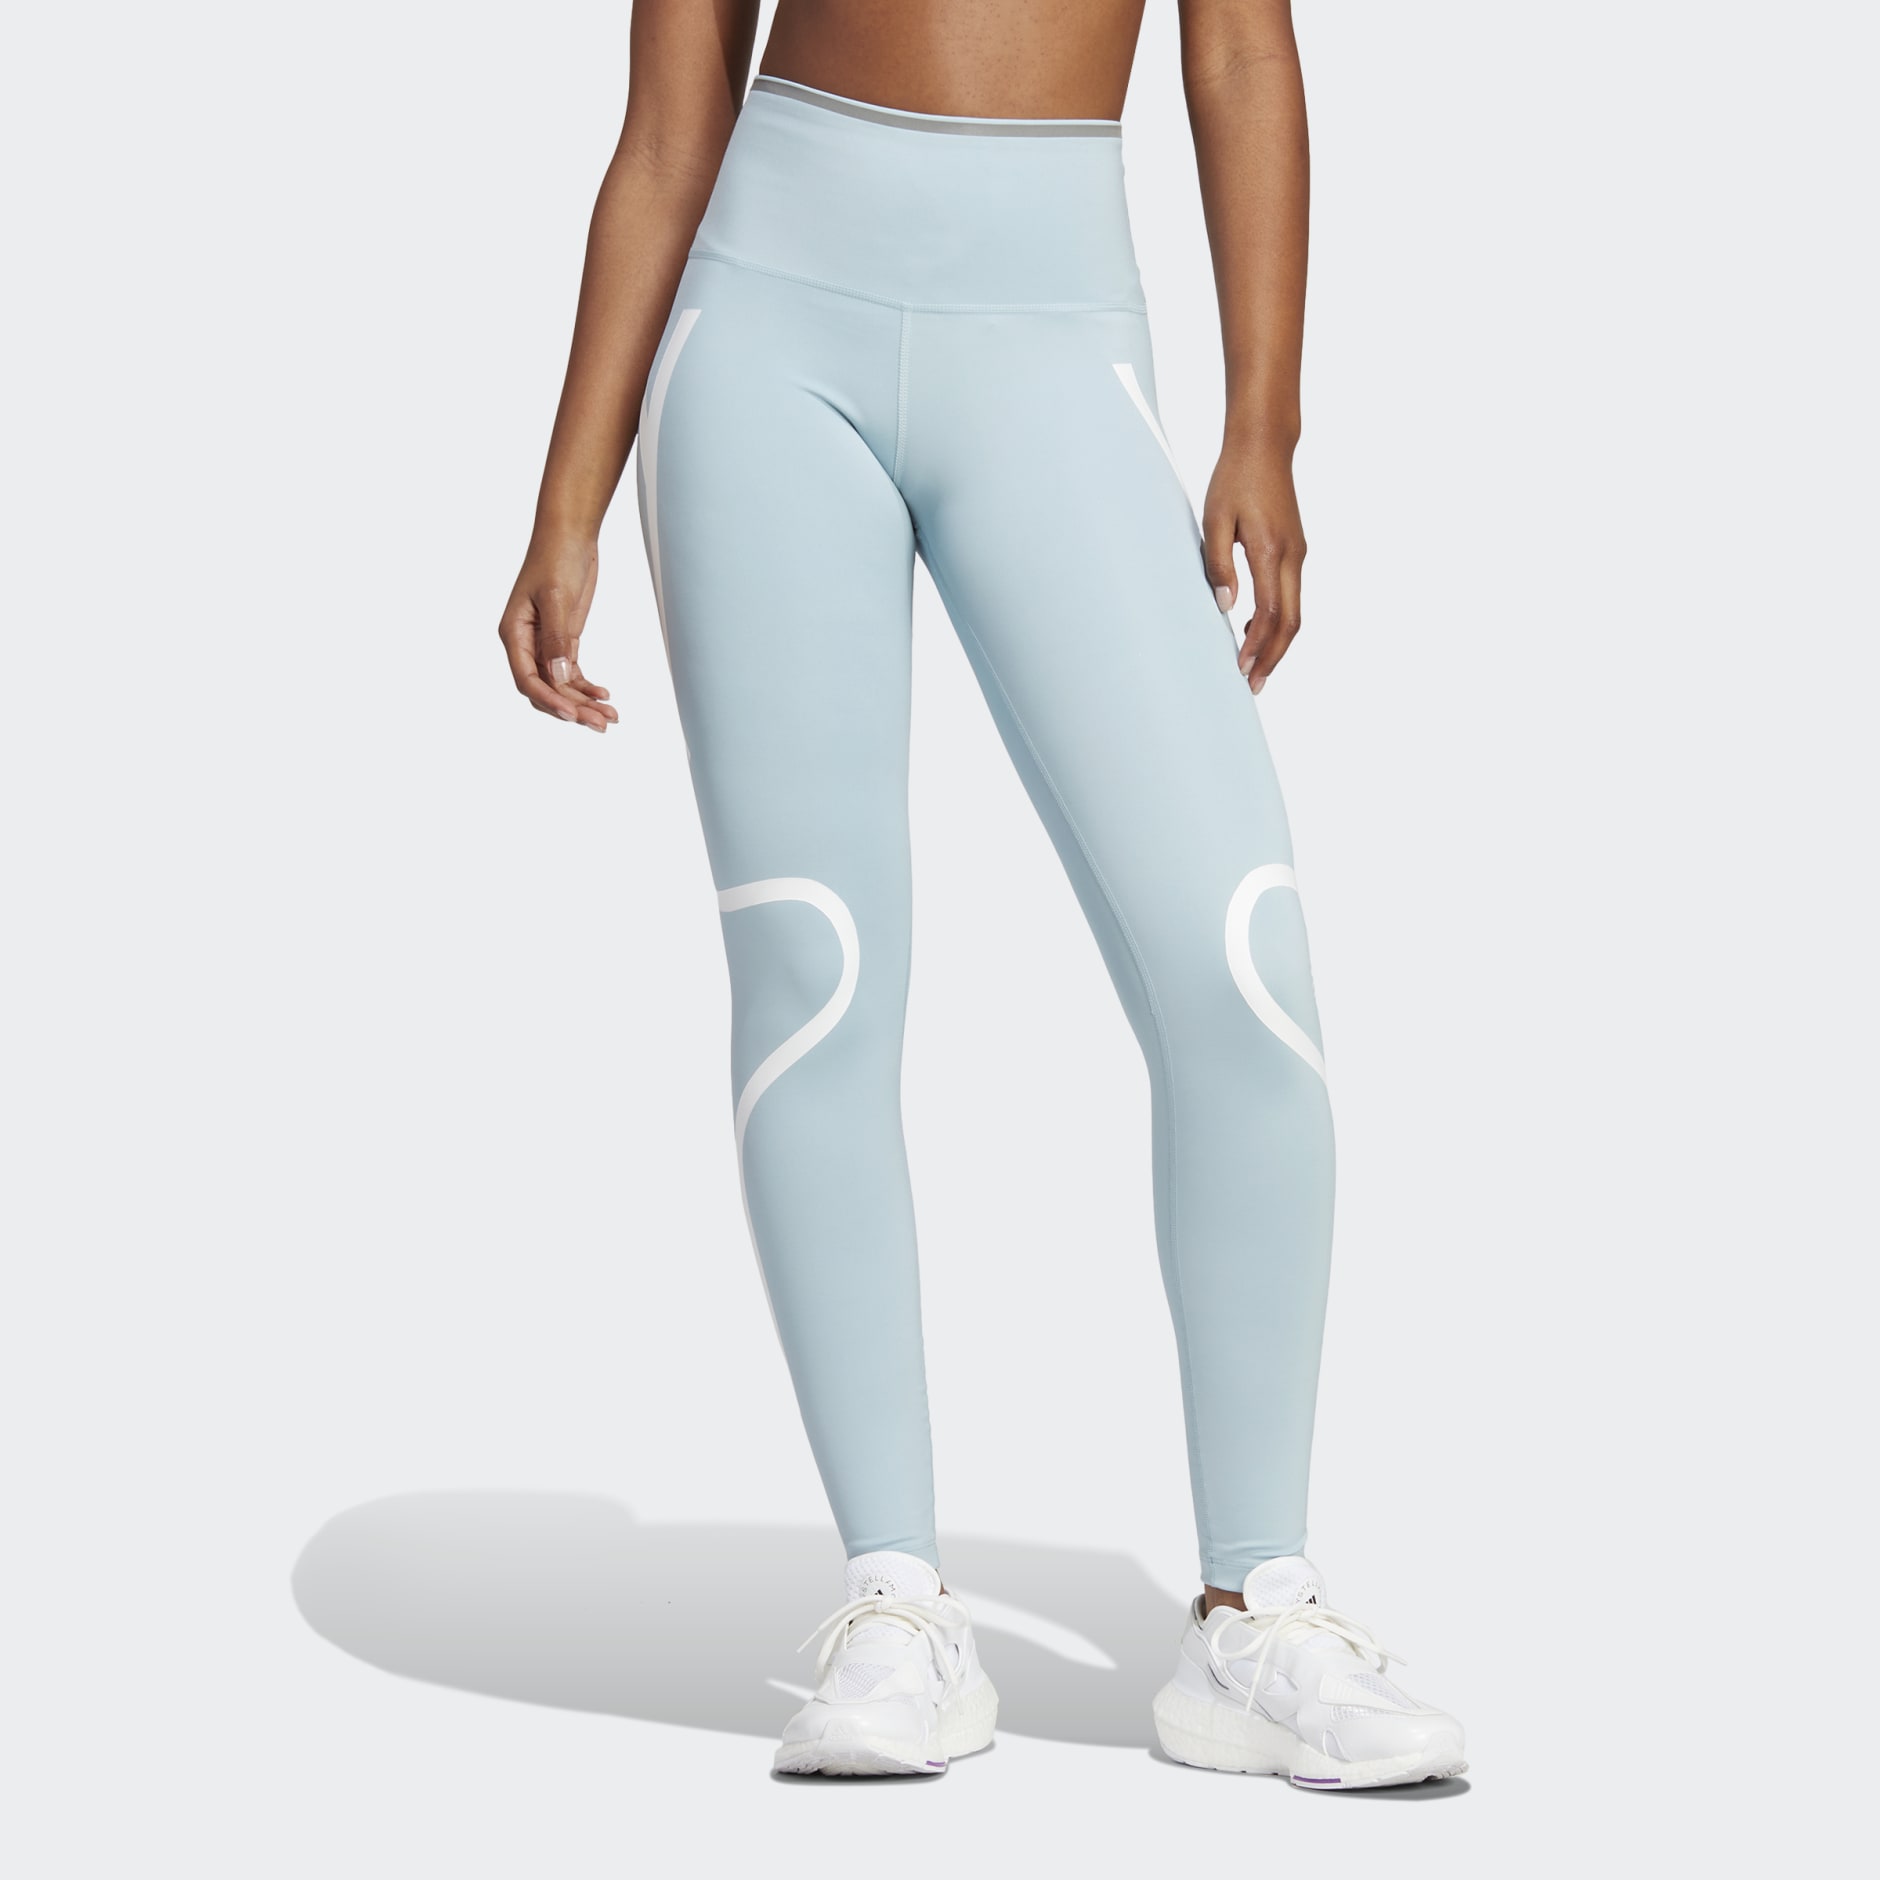 Nike Women's High Waist Leggings NEW with Tags - clothing & accessories -  by owner - apparel sale - craigslist